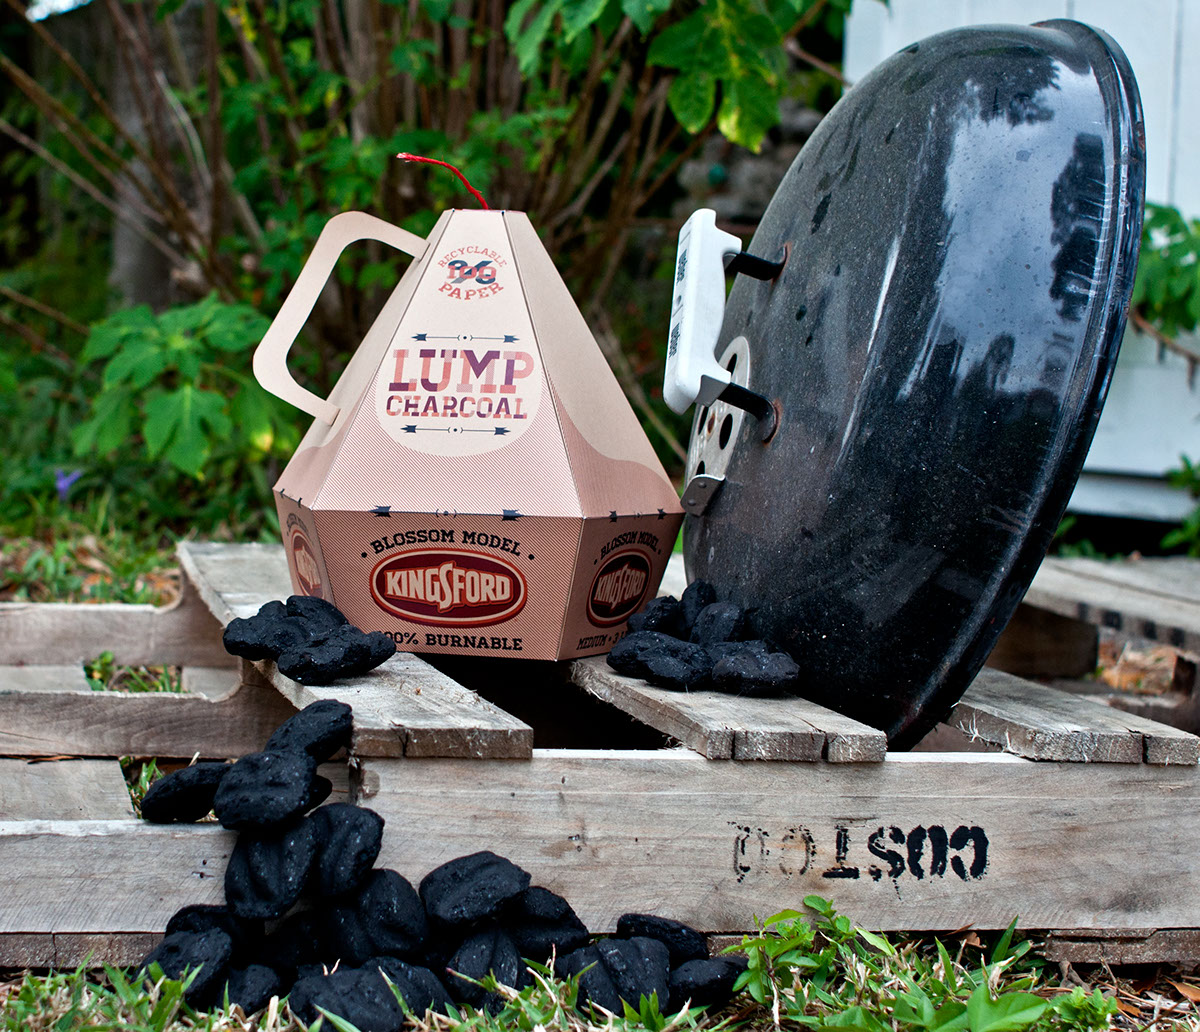 king Kingsford charcoal  Coal  fire  Outdoors Nick kyle  RINGLING  Packaging Pack  48 hours redesign Competition